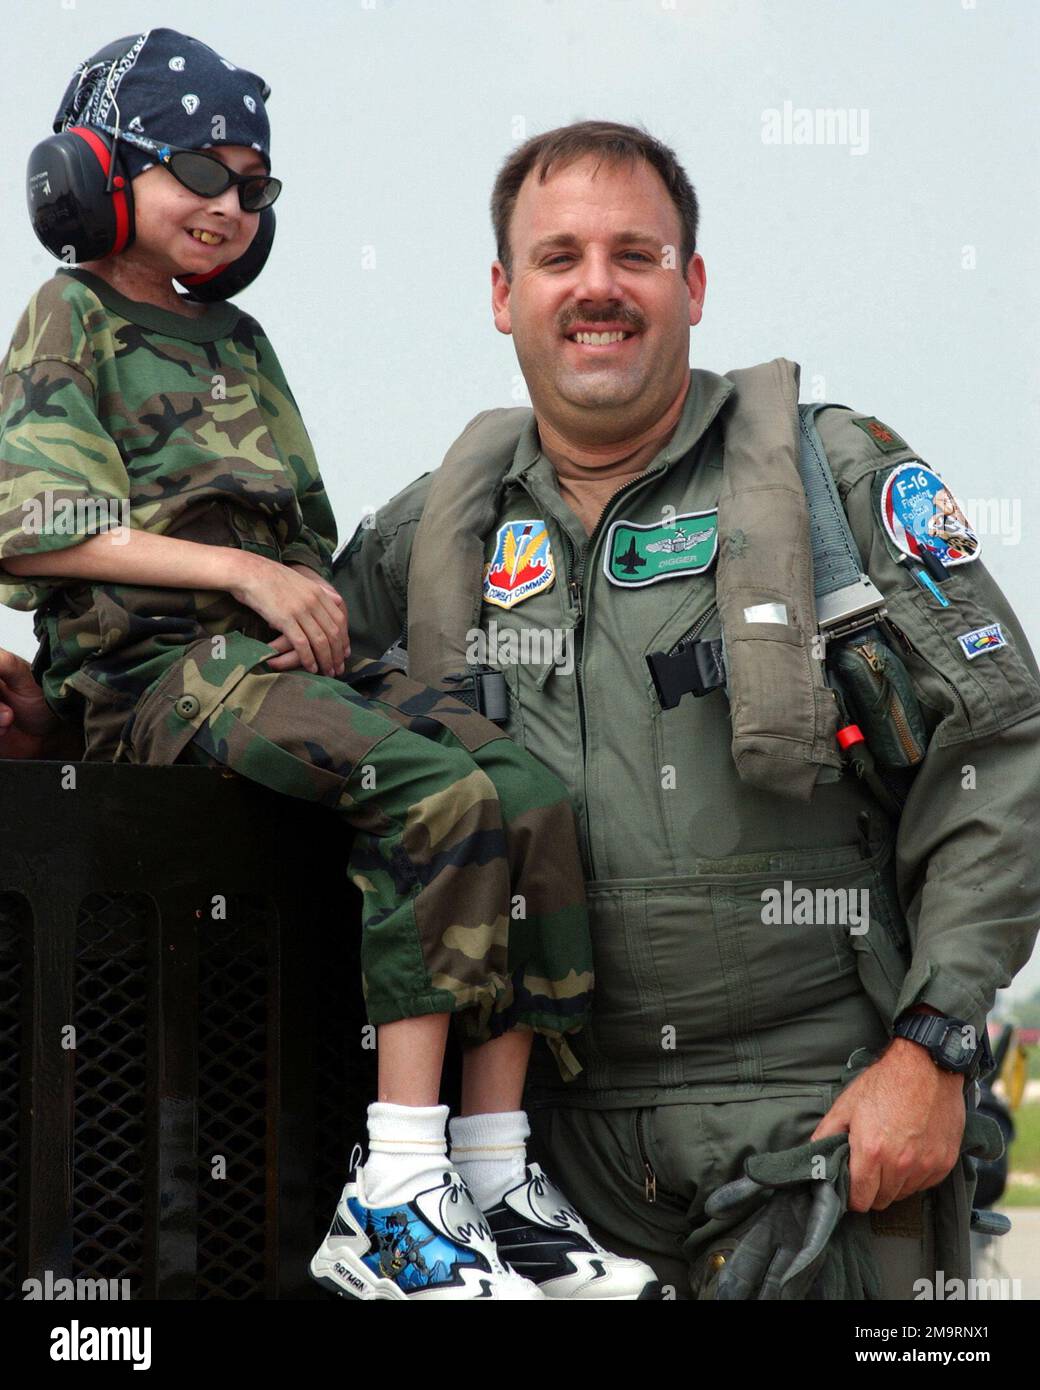 030814-F-2621S-006. [Complete] Scene Caption: Garrett Matuszewski (left) a 10-year-old guest of the Make-A-Wish Foundation, and US Air Force (USAF) Major (MAJ) Michael Digby, an F-16C Fighting Falcon aircraft Pilot, assigned to the 108th Fighter Wing (FW), Ohio National Guard (OHANG), poses for a photograph, on the flight line at Swanton, Ohio. Garrett's wish was to visit a military installation with F-16 fighter aircraft. Members of the 180th FW made sure to make it a memorable trip for Garrett. He spent the day on the flight line watching the jets take off while listening and talking to the Stock Photo